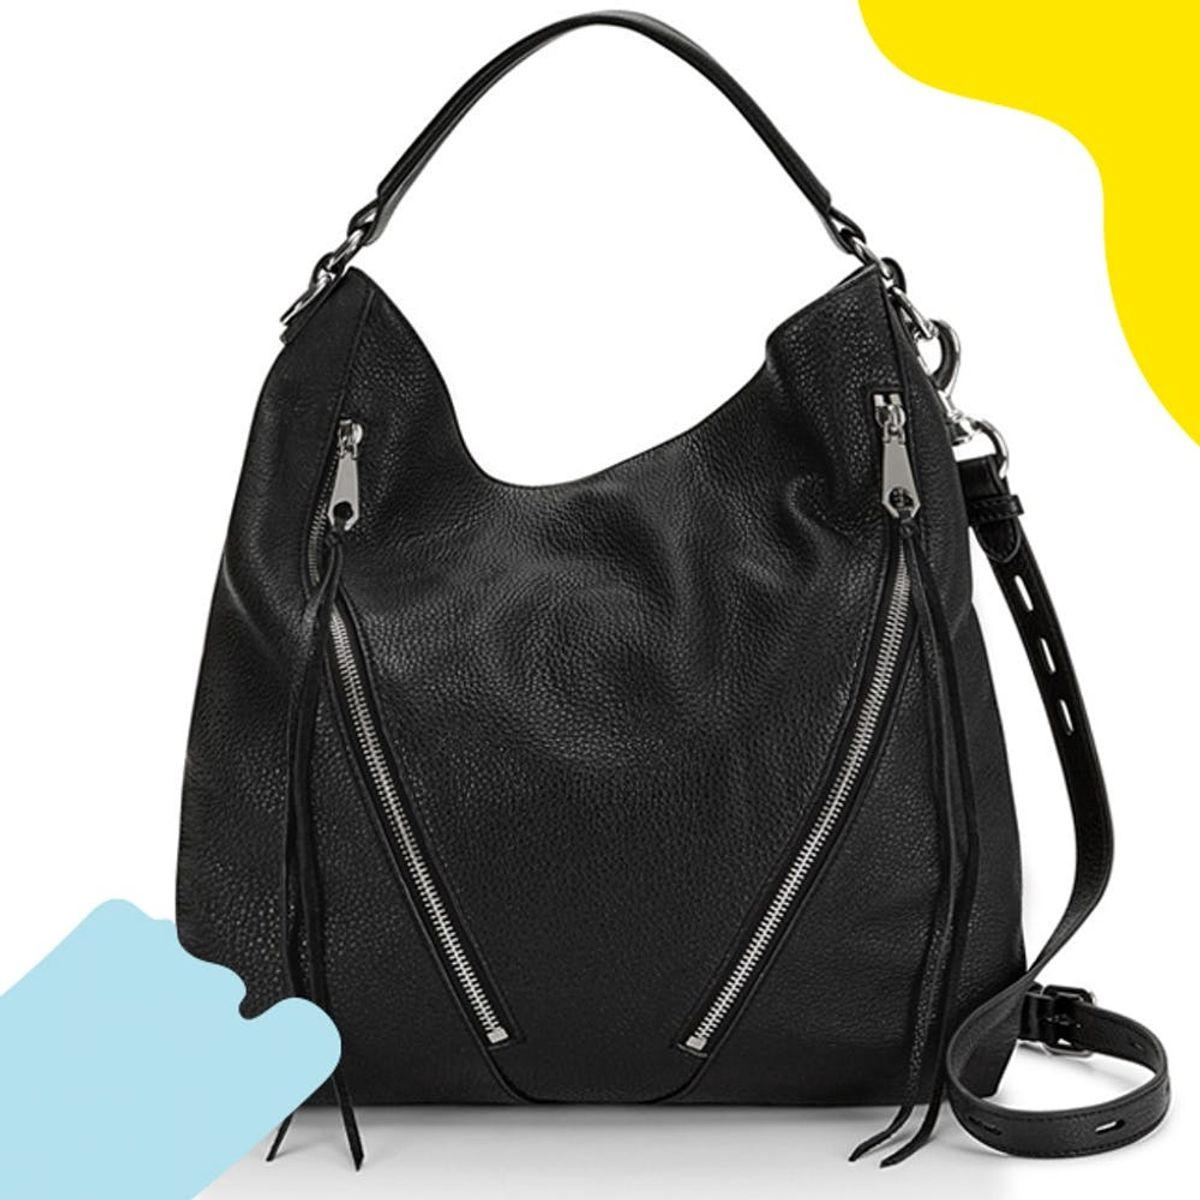 7 Hobo-Style Handbags That Prove the Slouch Is Back